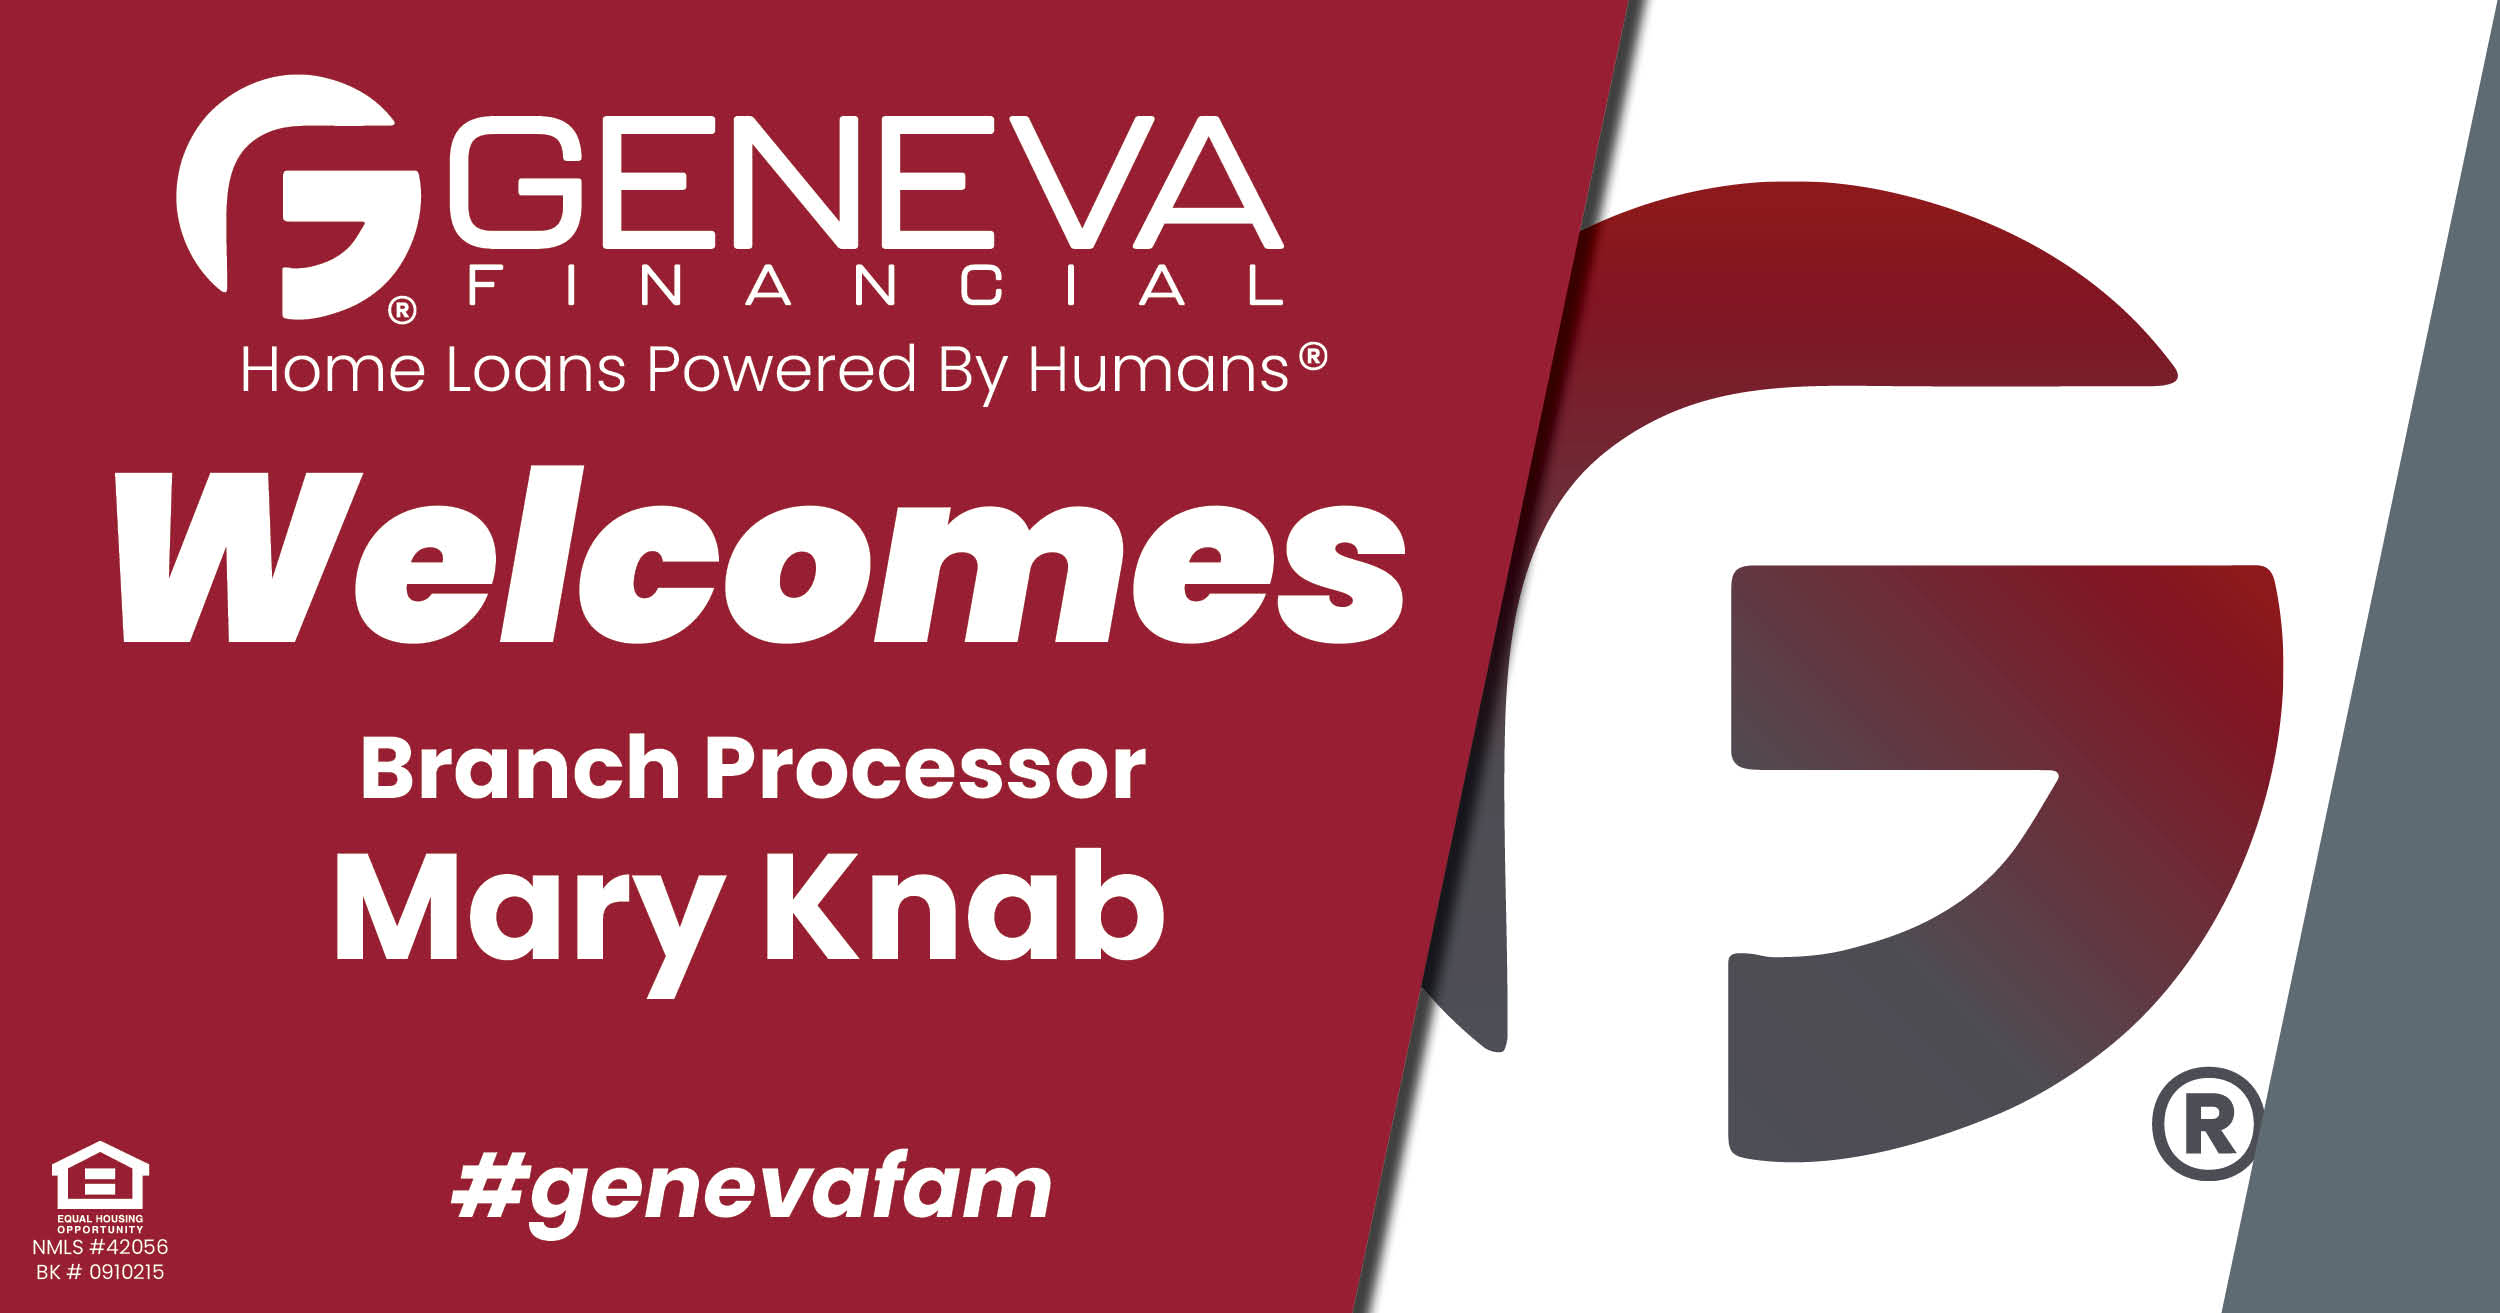 Geneva Financial Welcomes New Processor Mary Knab to the state of Ohio – Home Loans Powered by Humans®.